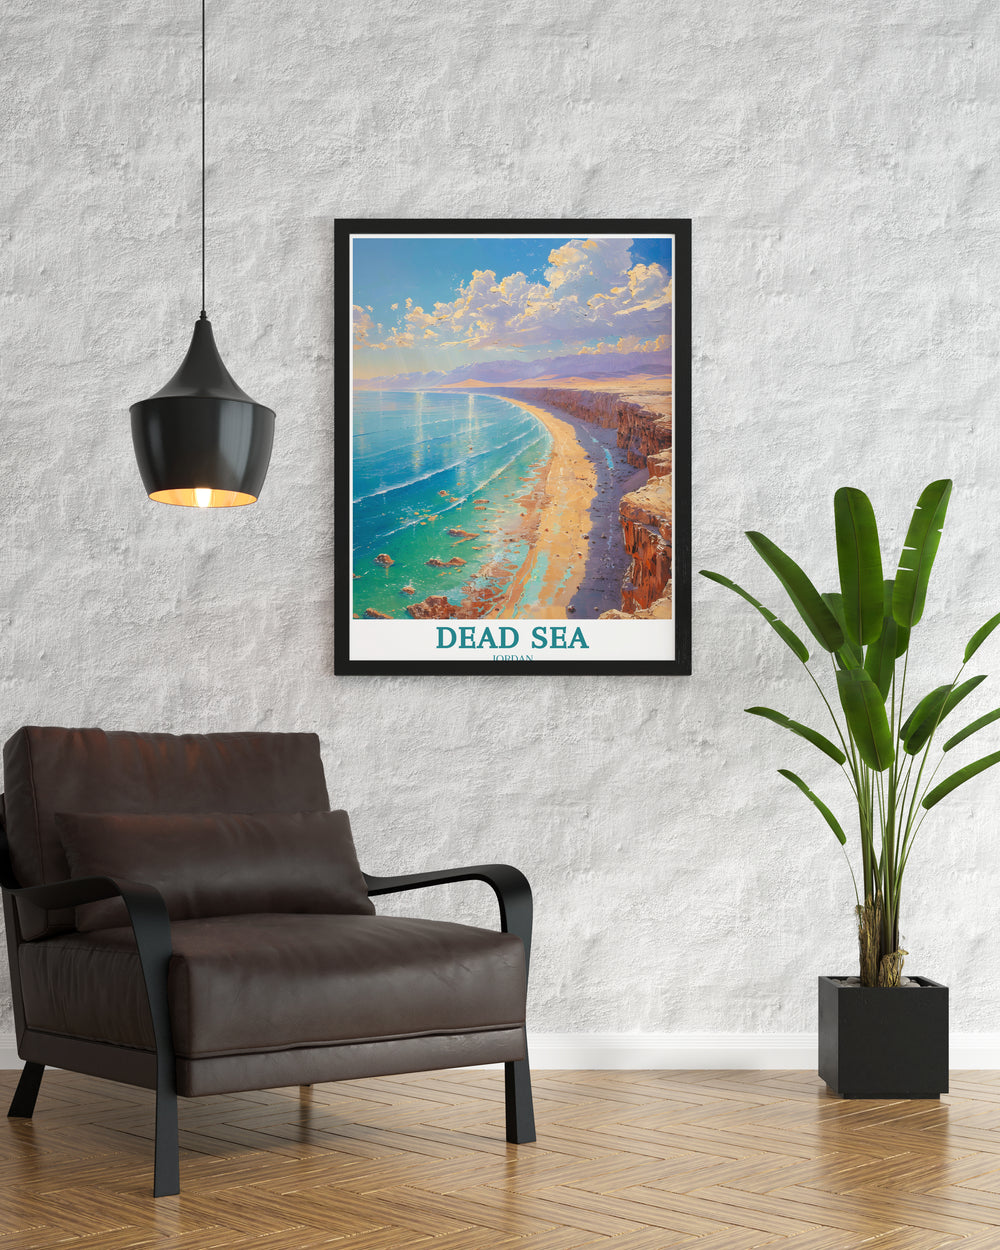 Featuring the iconic Dead Sea with its buoyant waters bordered by Israel and Jordan, this landscape print is a quintessential house warming gift for those fascinated by the wonders of the Middle East